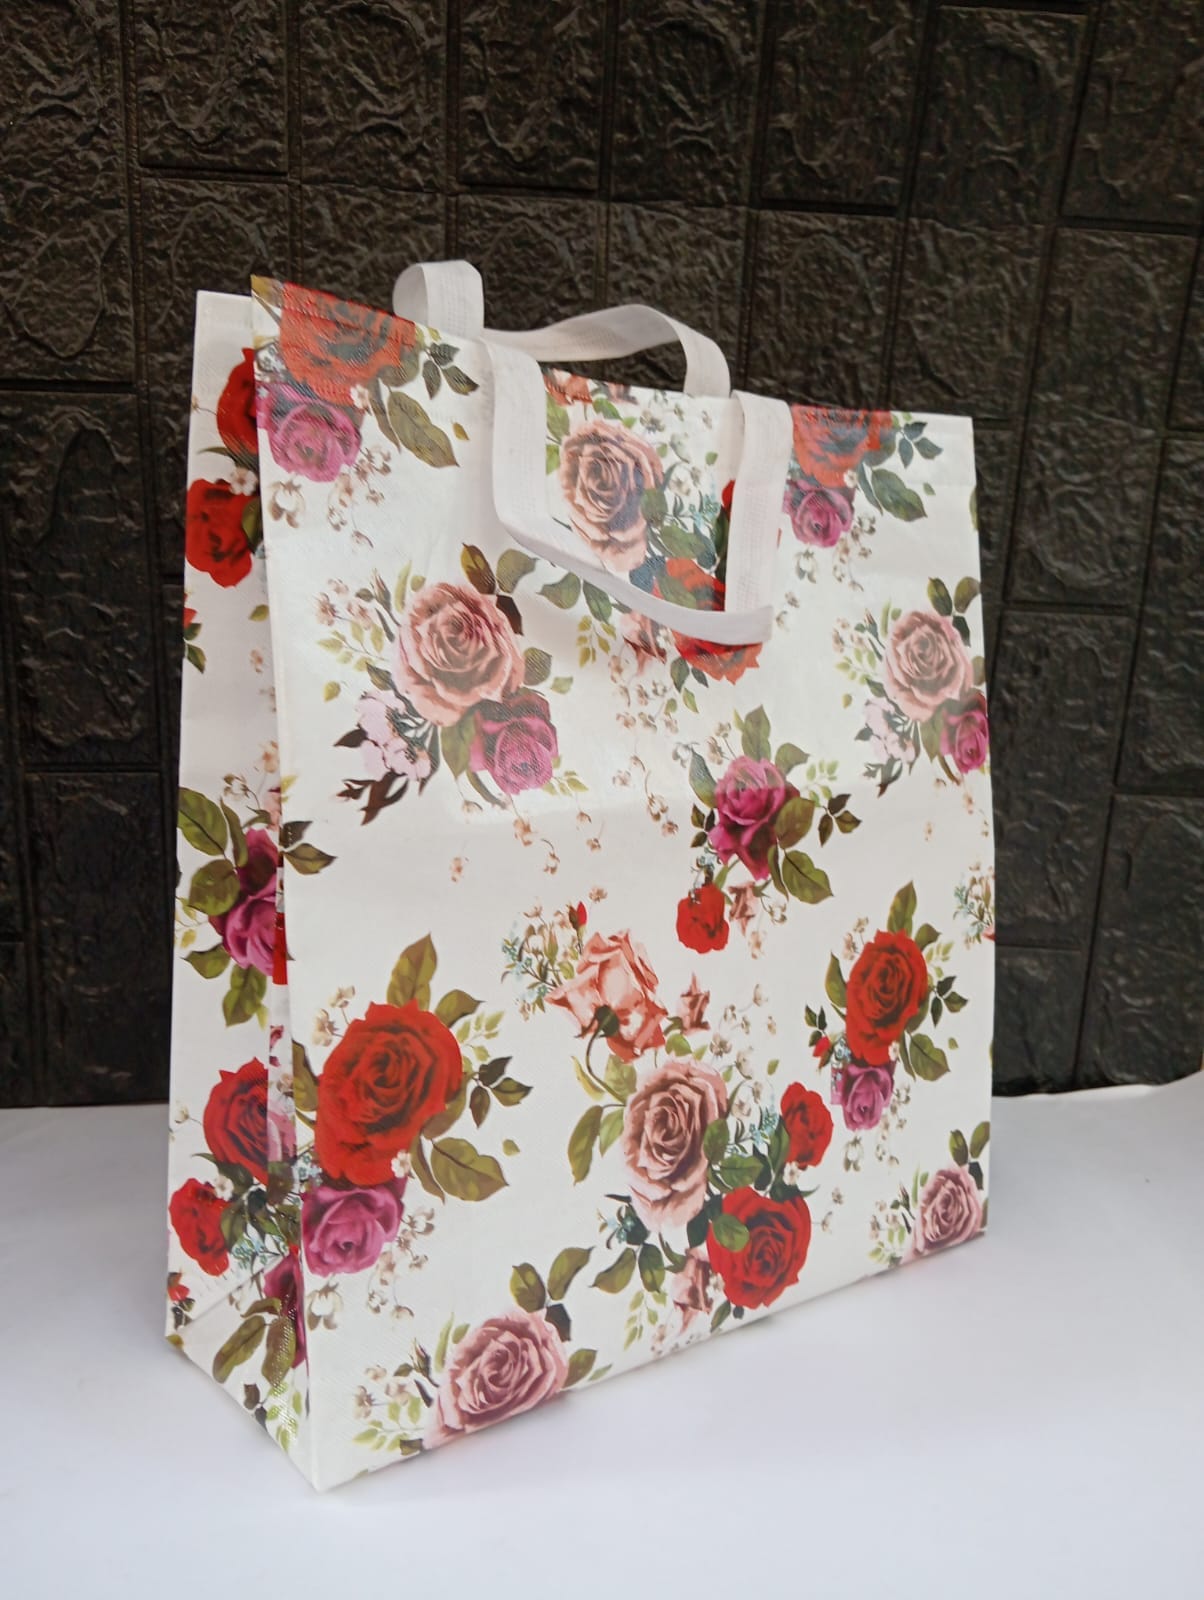 Mumbai market Gift Boxes & Paper Bags loop-s1 (P2) Small Loop Handle Printed Shopping Bags size-30x24x10cm (assorted design)